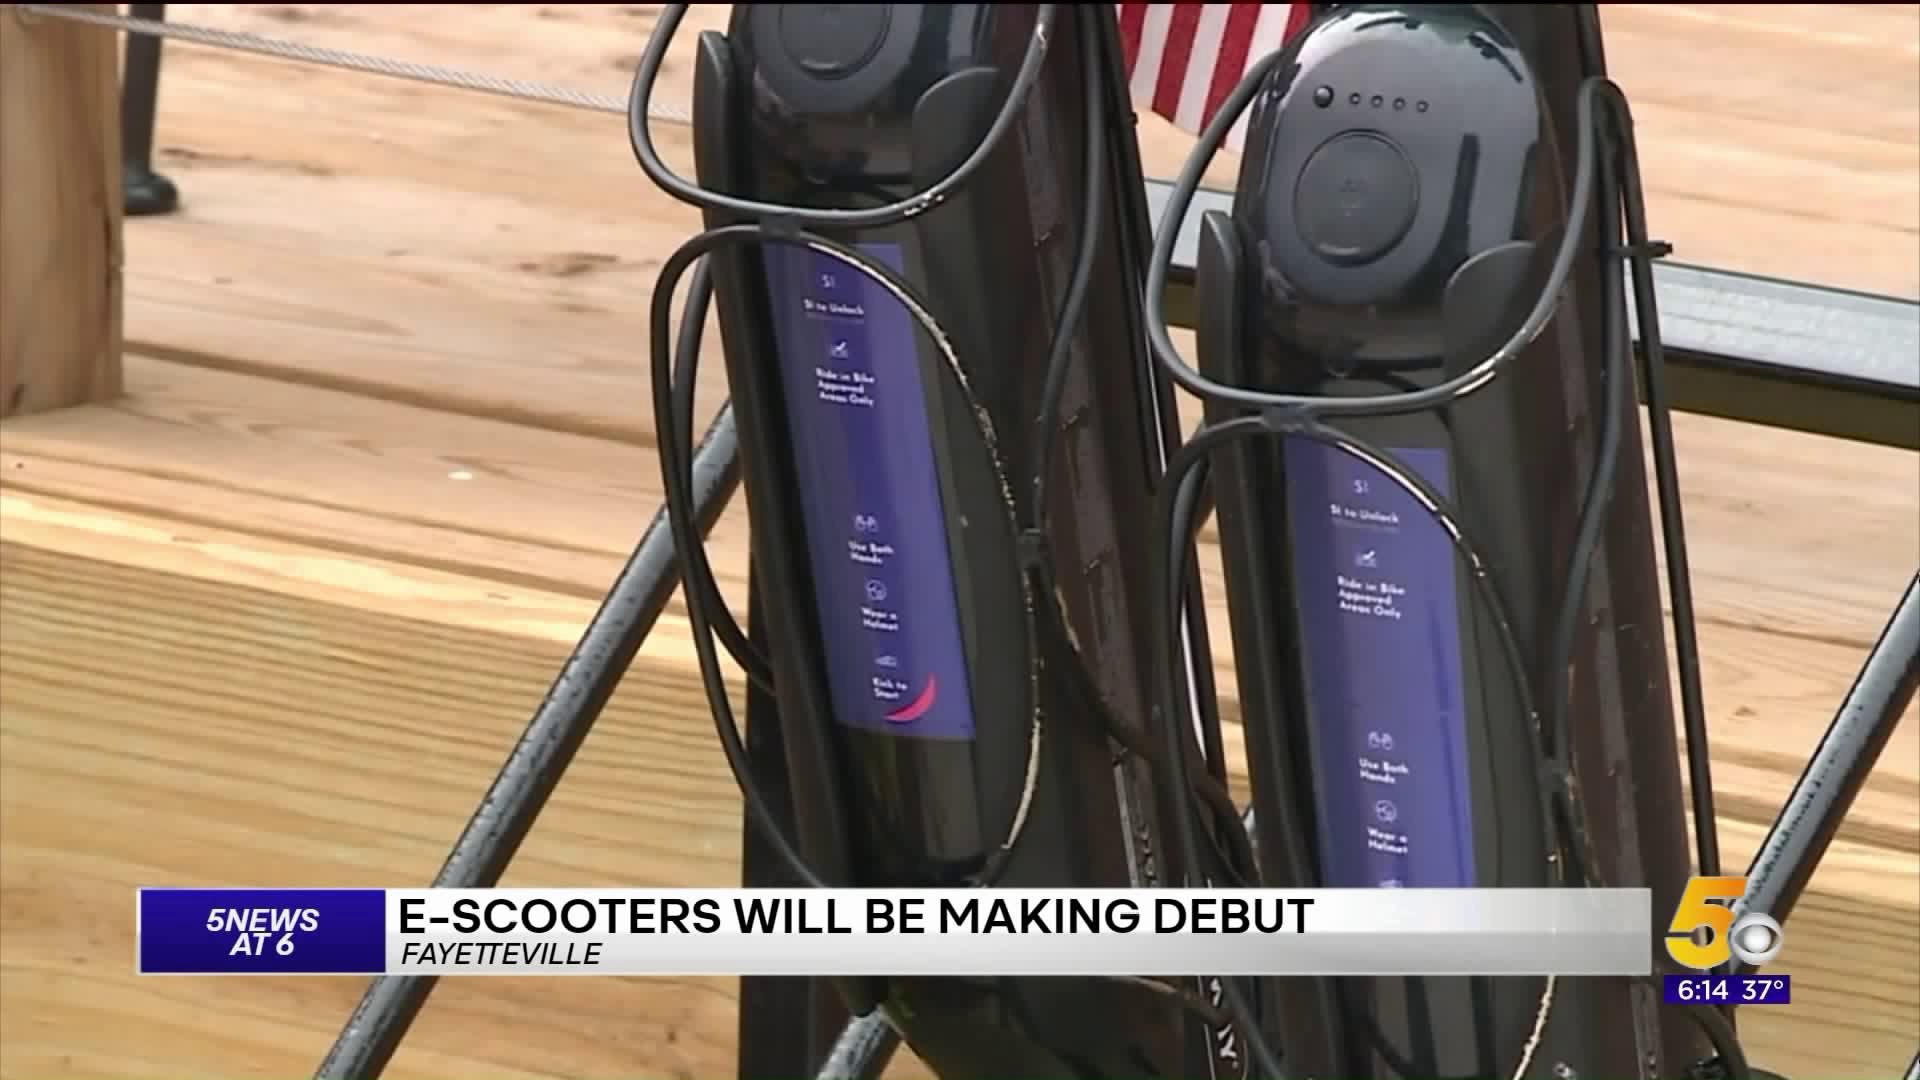 Electric Scooters Coming Soon To Fayetteville